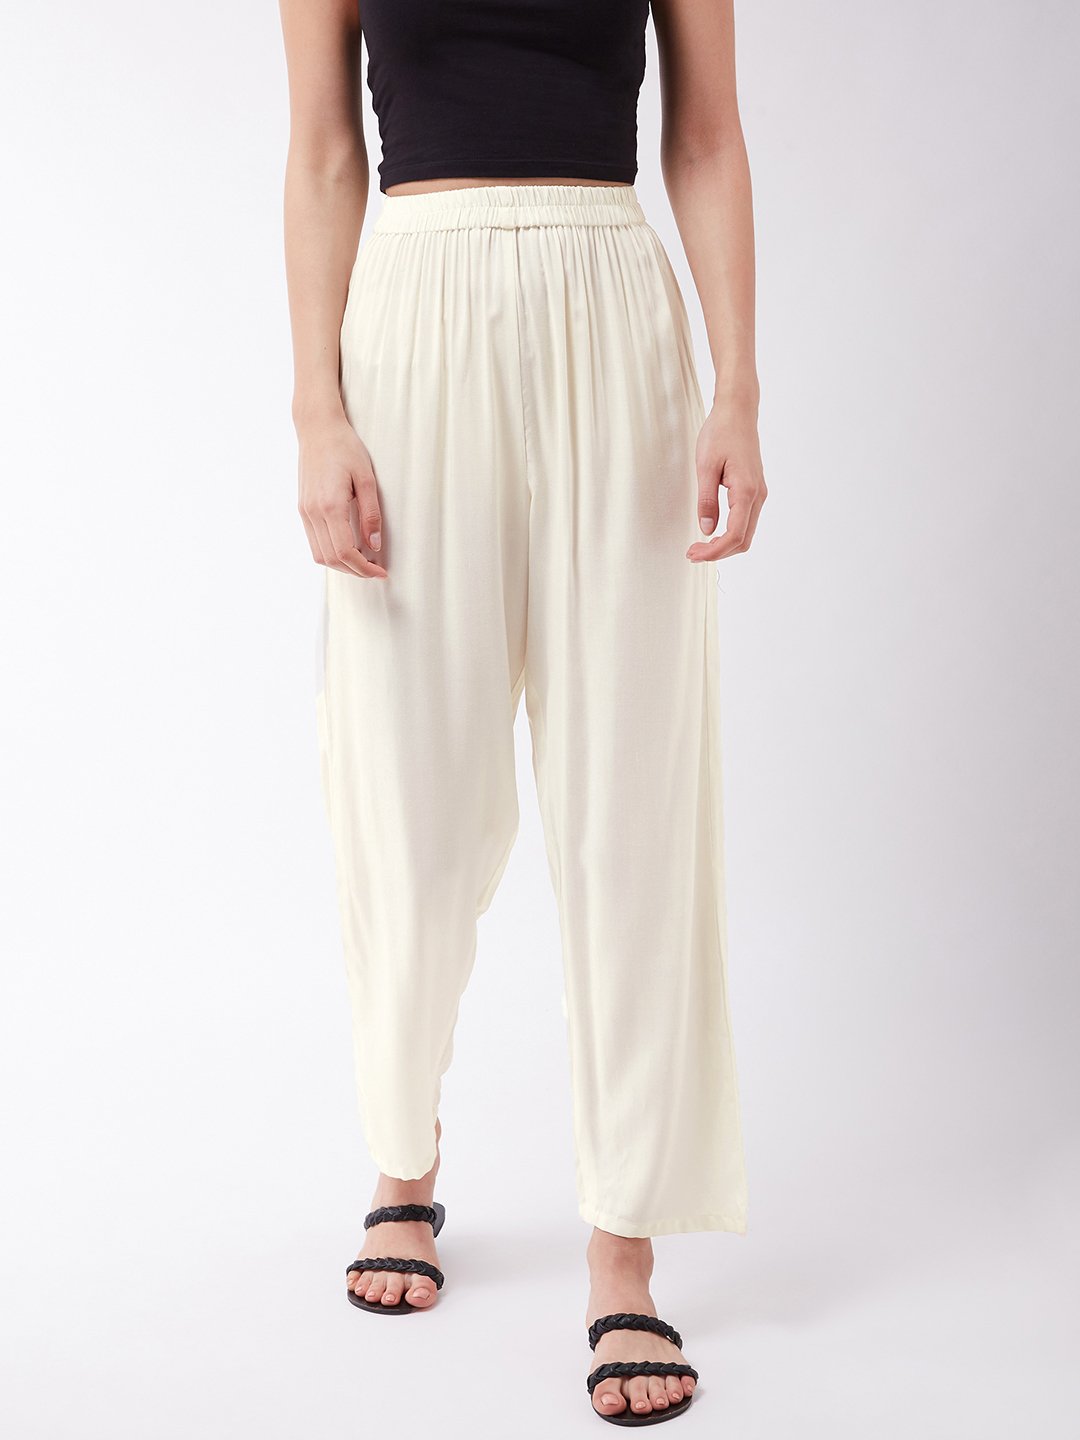 Topshop PETITE Cream Suit Trousers | Colored pants outfits, Topshop outfit,  Outfits with leggings